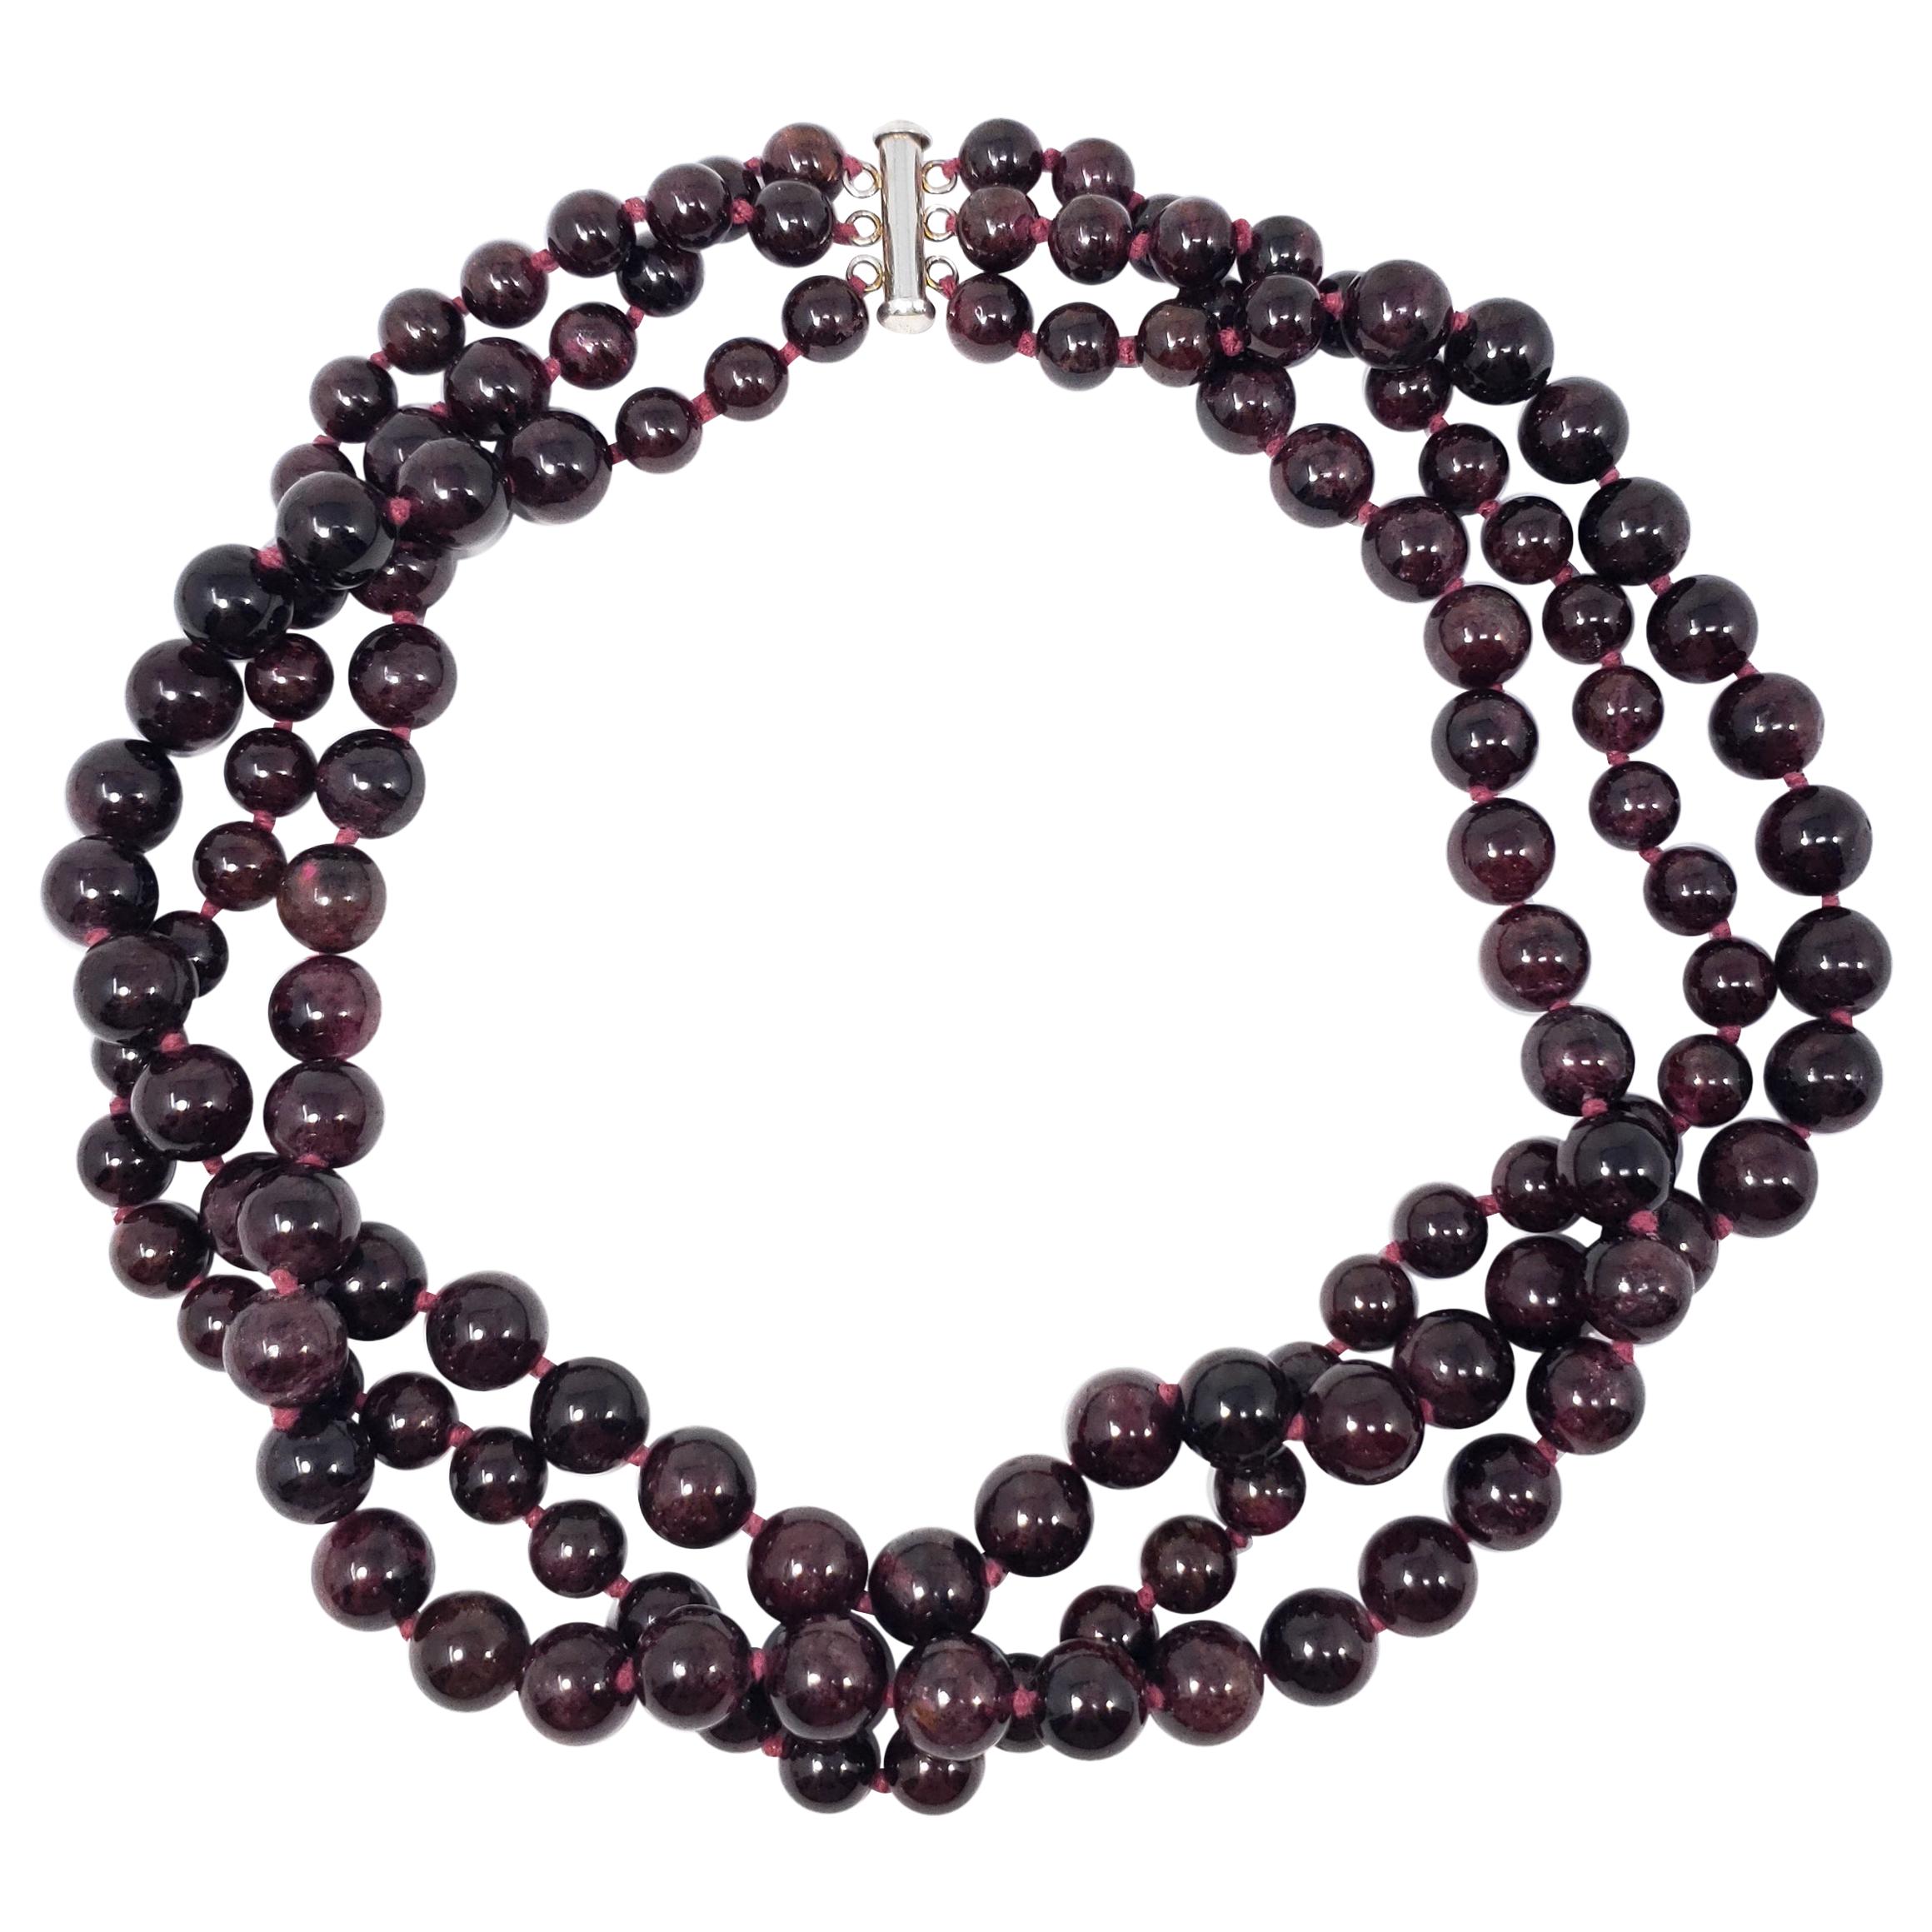 Three strands of lavish garnet beads on a knotted string necklace, fastened with a sterling silver clasp. An exquisite necklace for any occasion!

Marks / hallmarks / etc: 925